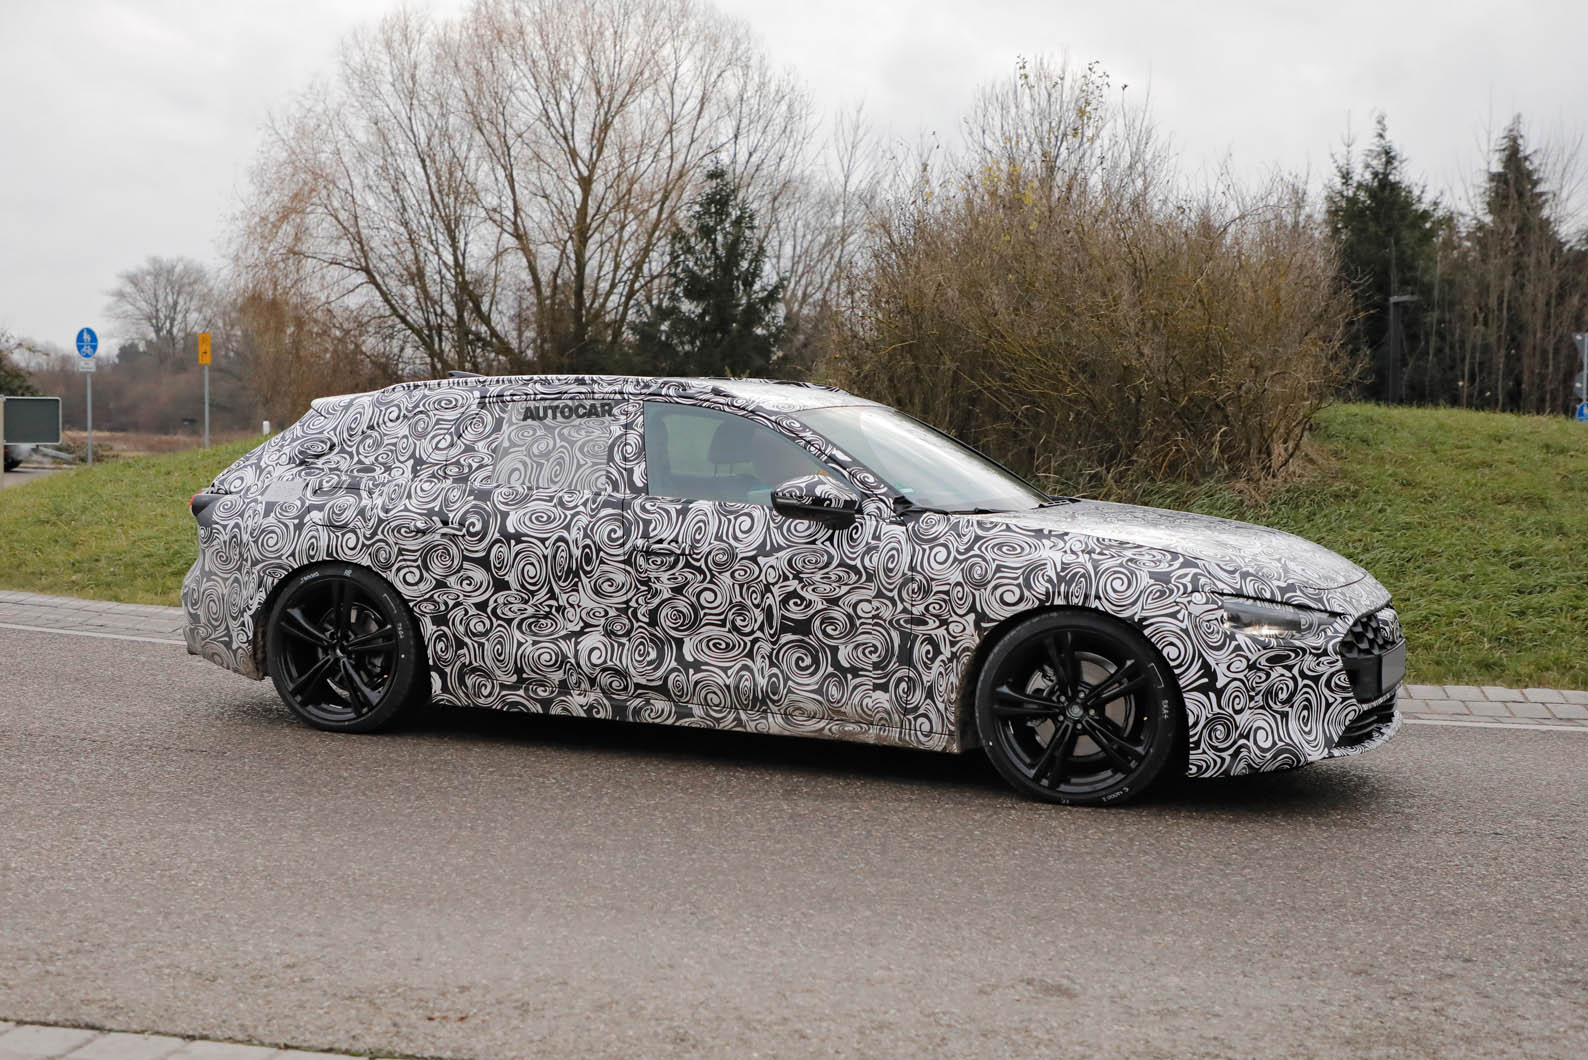 New 2023 Audi A4 Avant spotted as ...